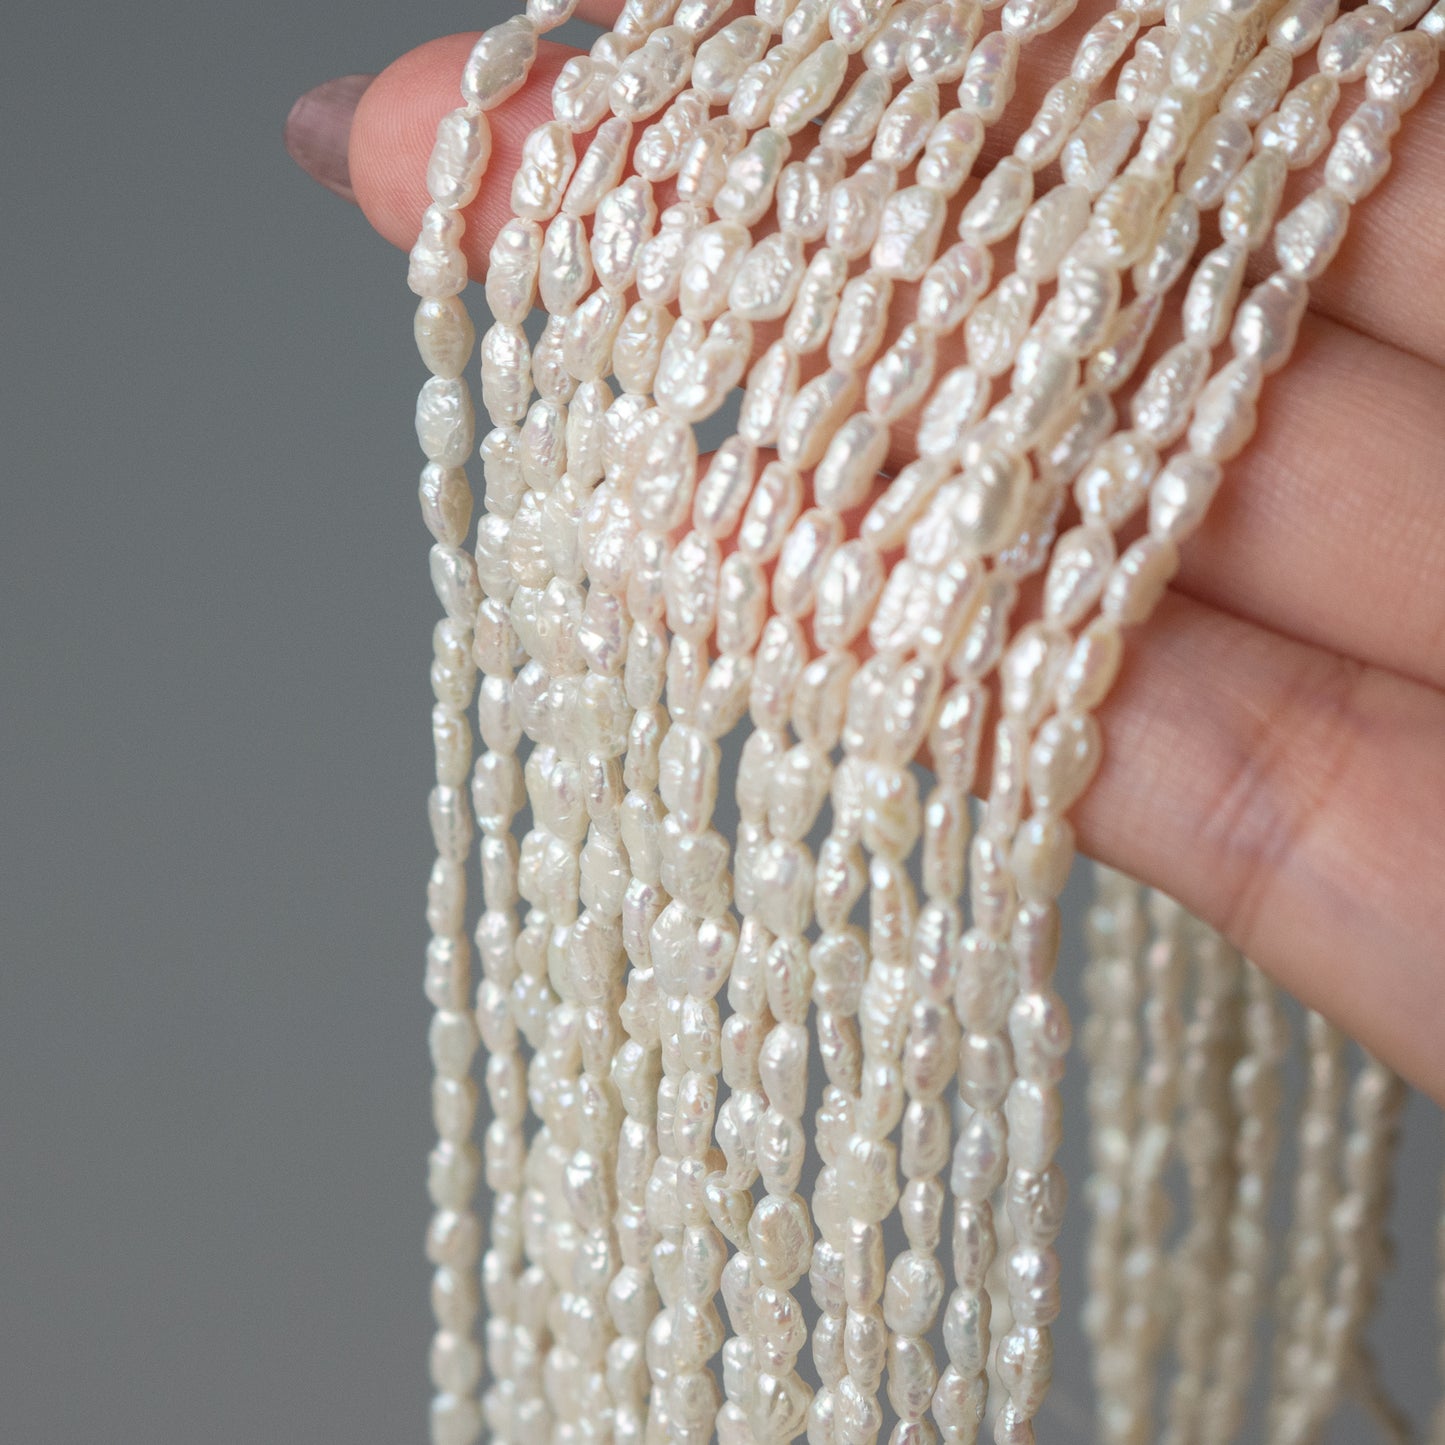 [Japanese product] Freshwater Pearl Natural White Poppy Seed Beads 1 Strand